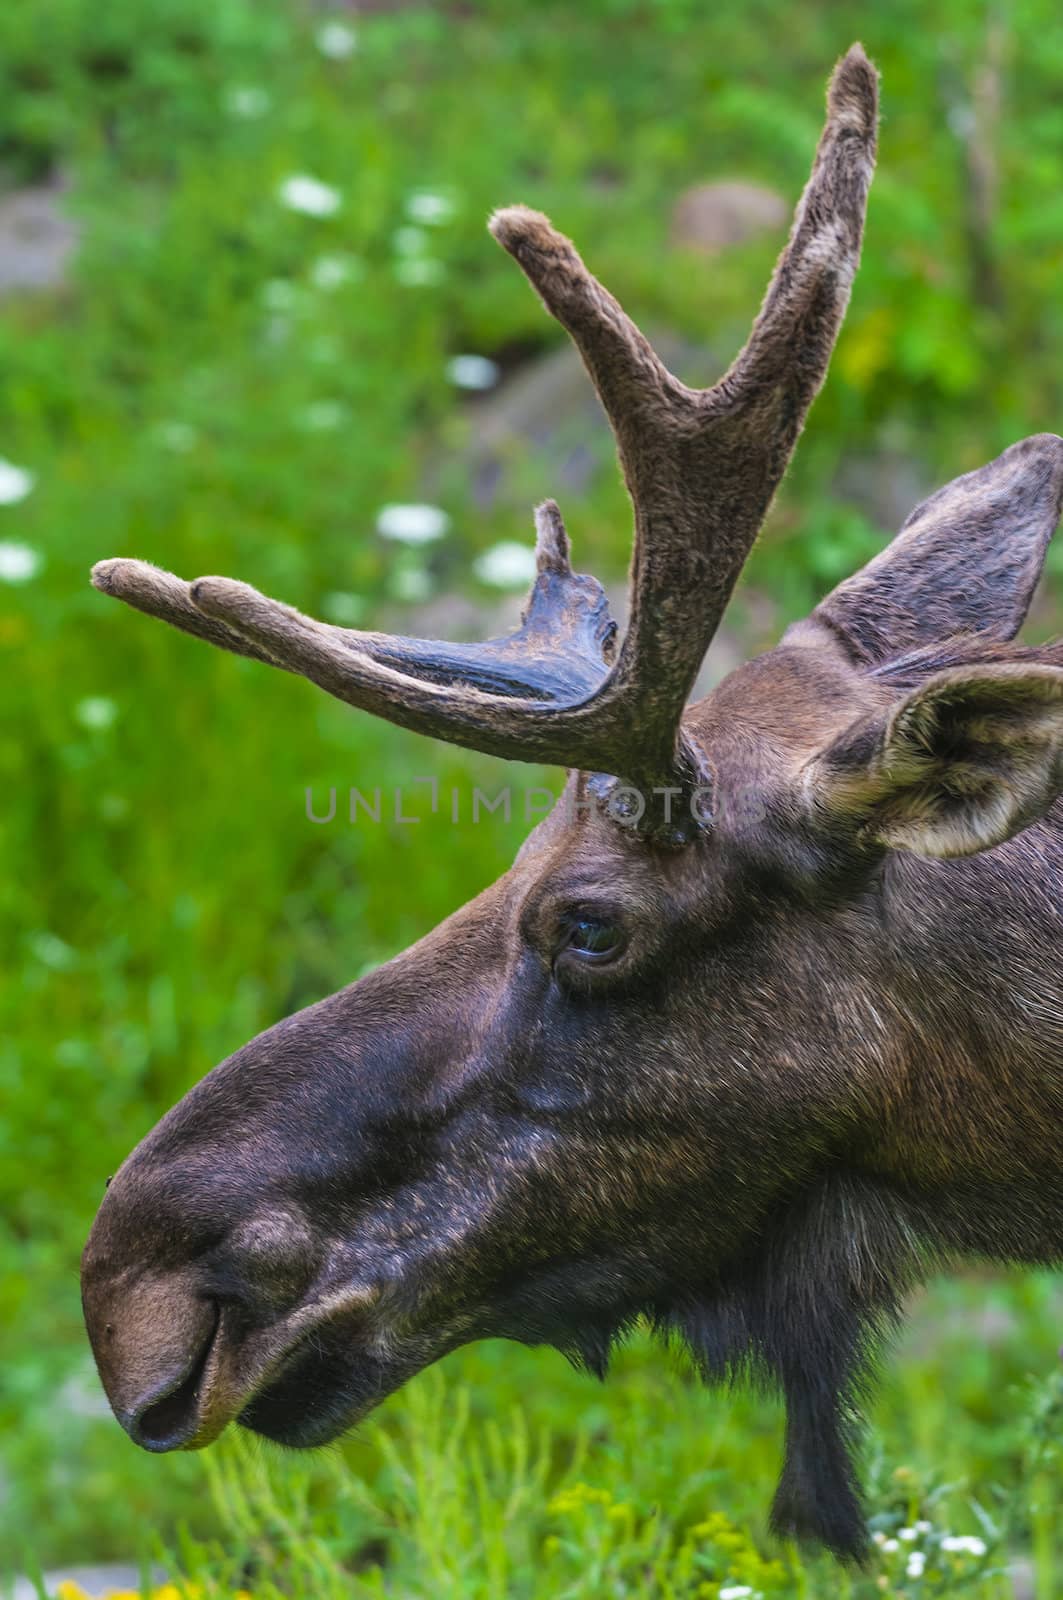 Side view of a Large Moose against green grass